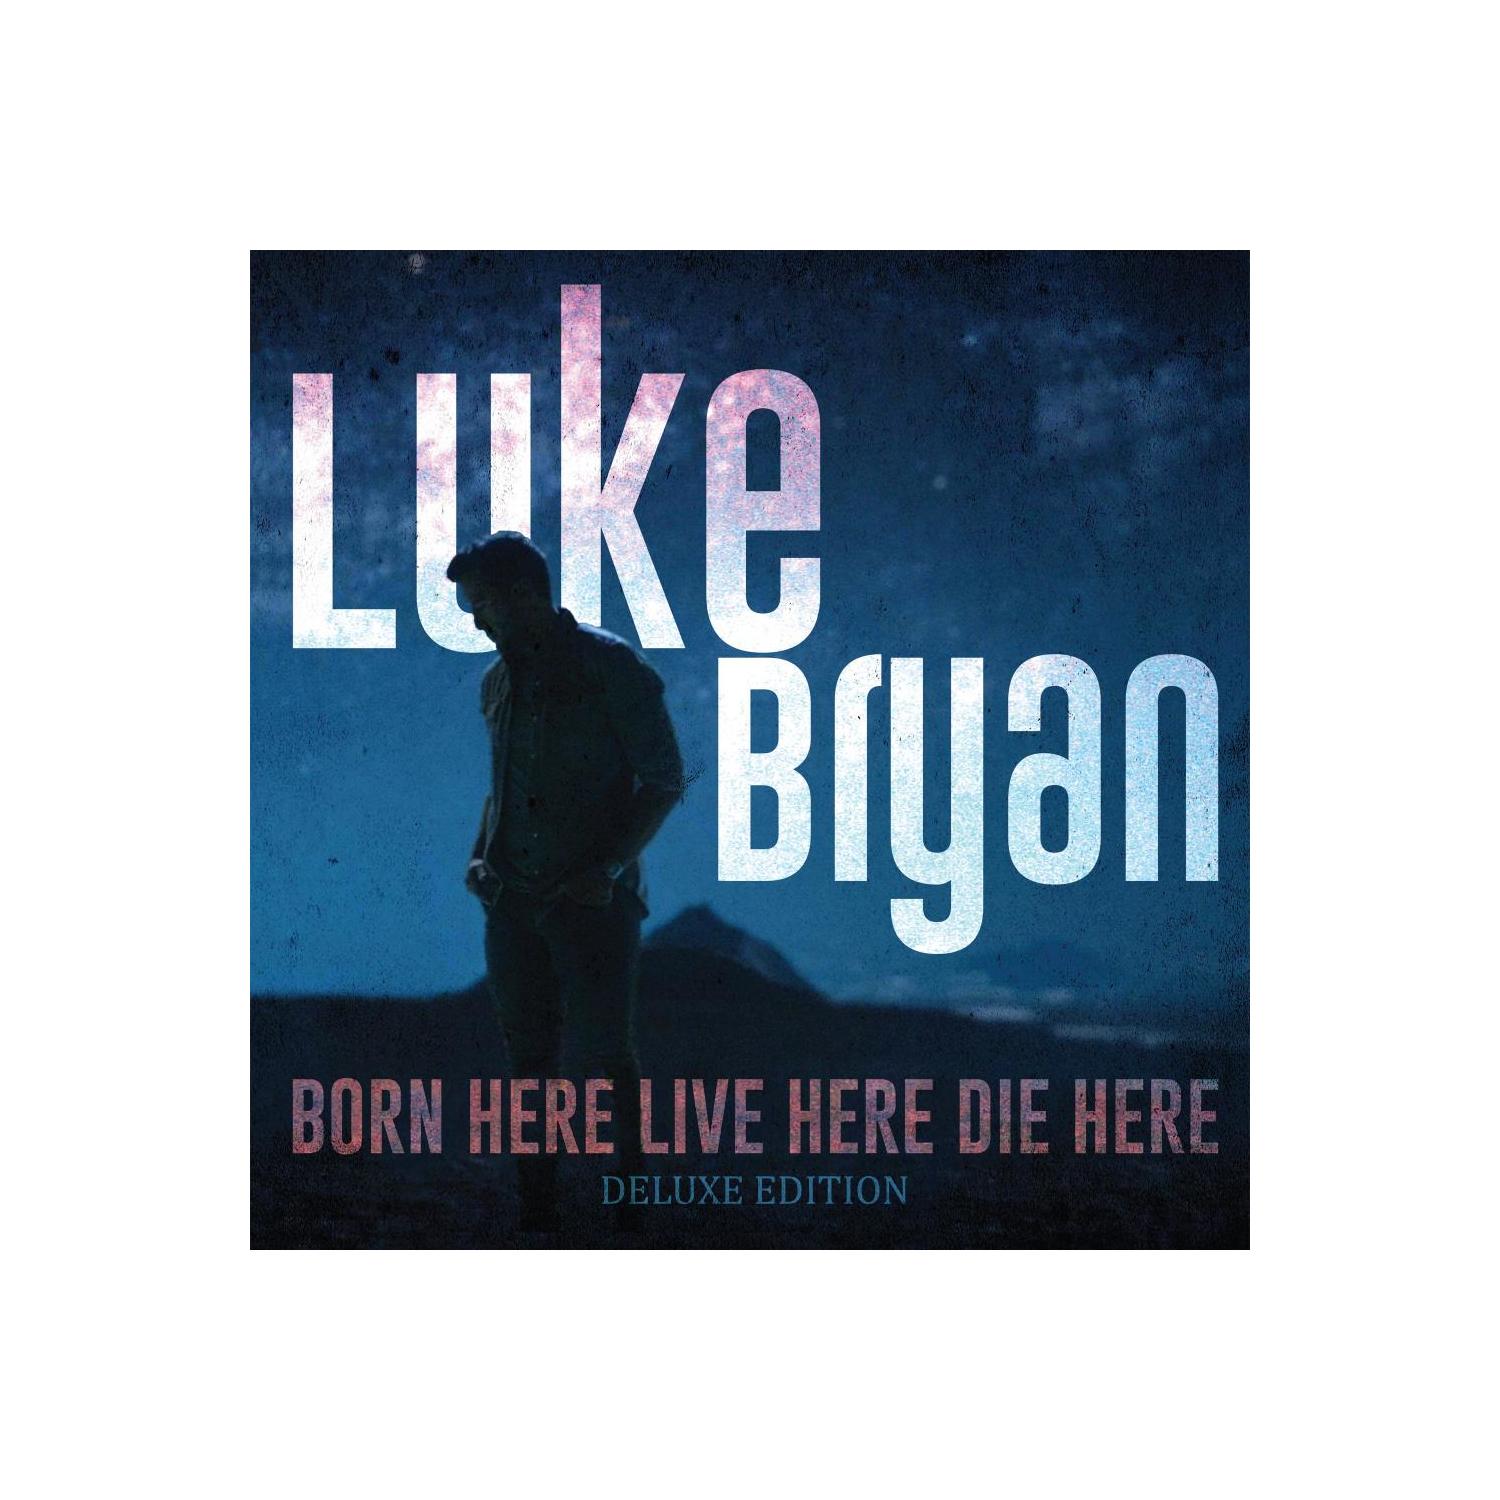 BORN HERE LIVE HERE DIE HERE DELUXE EDITION -- BRYAN LUKE